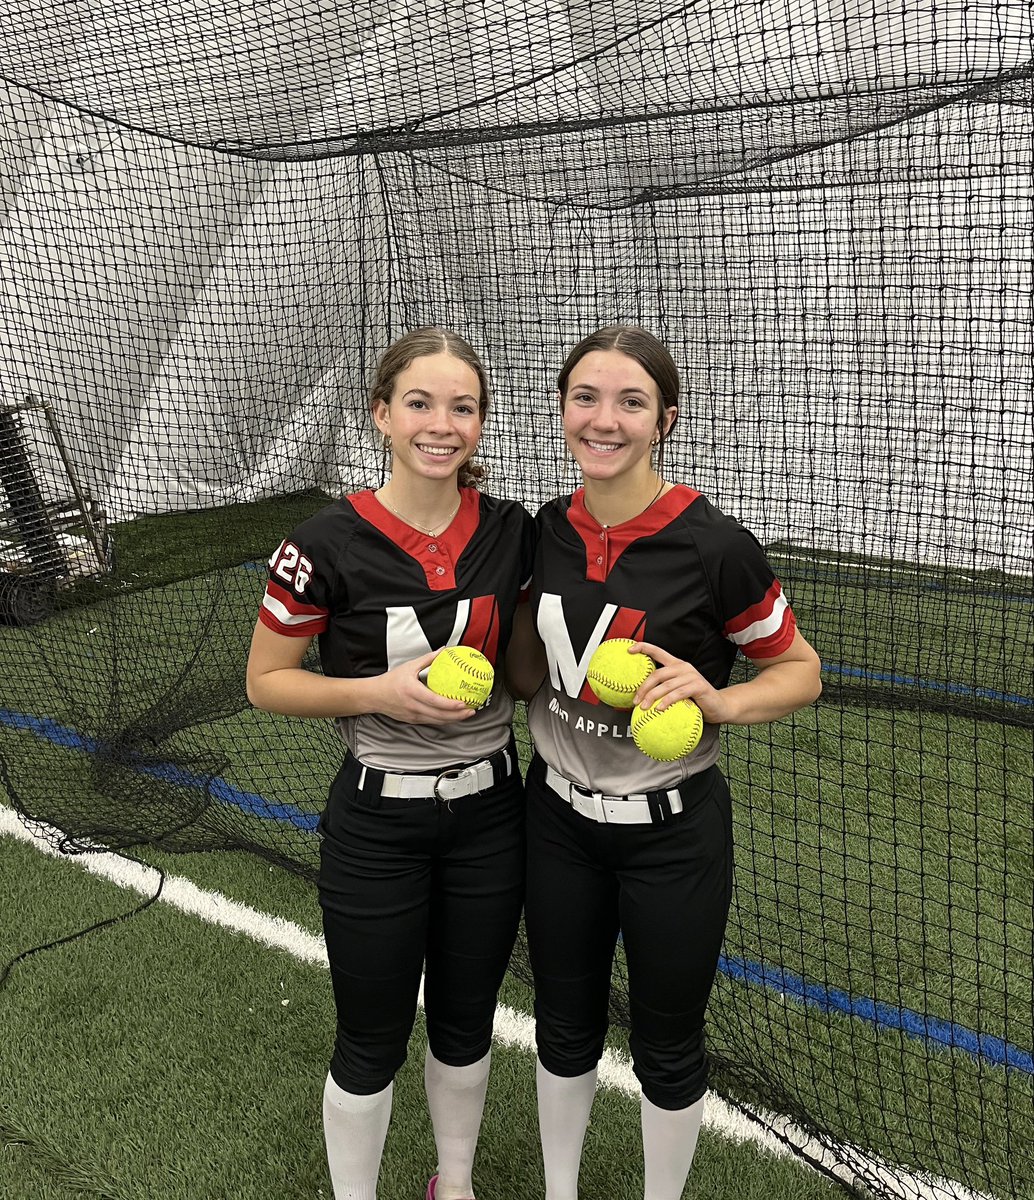 We went 2-0 in pool play today. They had great team effort all around and these two, Brilee Day and Paige Griggs, helping out the offense with one homerun for B Day and two homeruns for Paige! Way to go ladies! 
First game of bracket play tomorrow at 9:15 am. Let's get it!